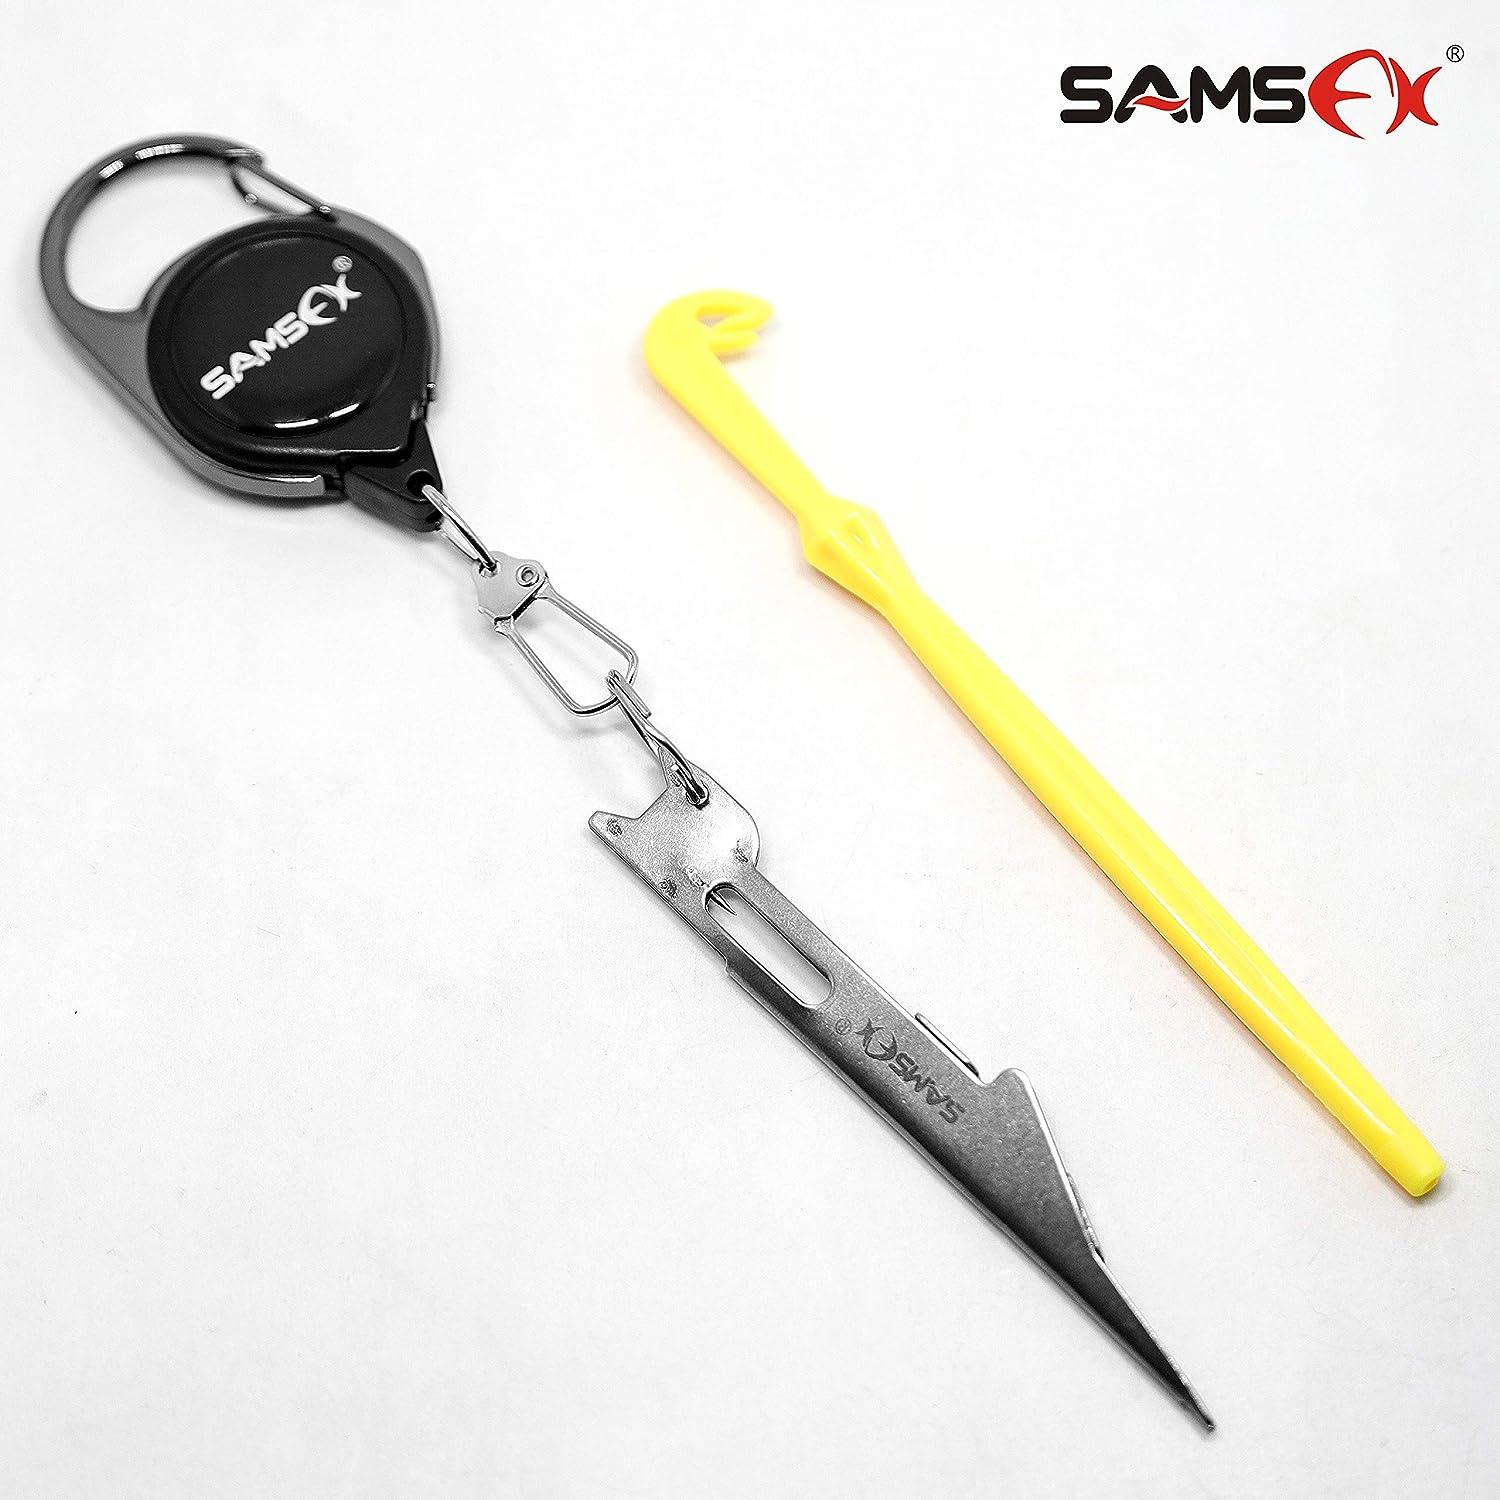 SAMSFX Fly Fishing Knot Tying Tools Quick Knot Tool For Fishing Hooks,  Lures, Flies, Trout Line Backing, Come